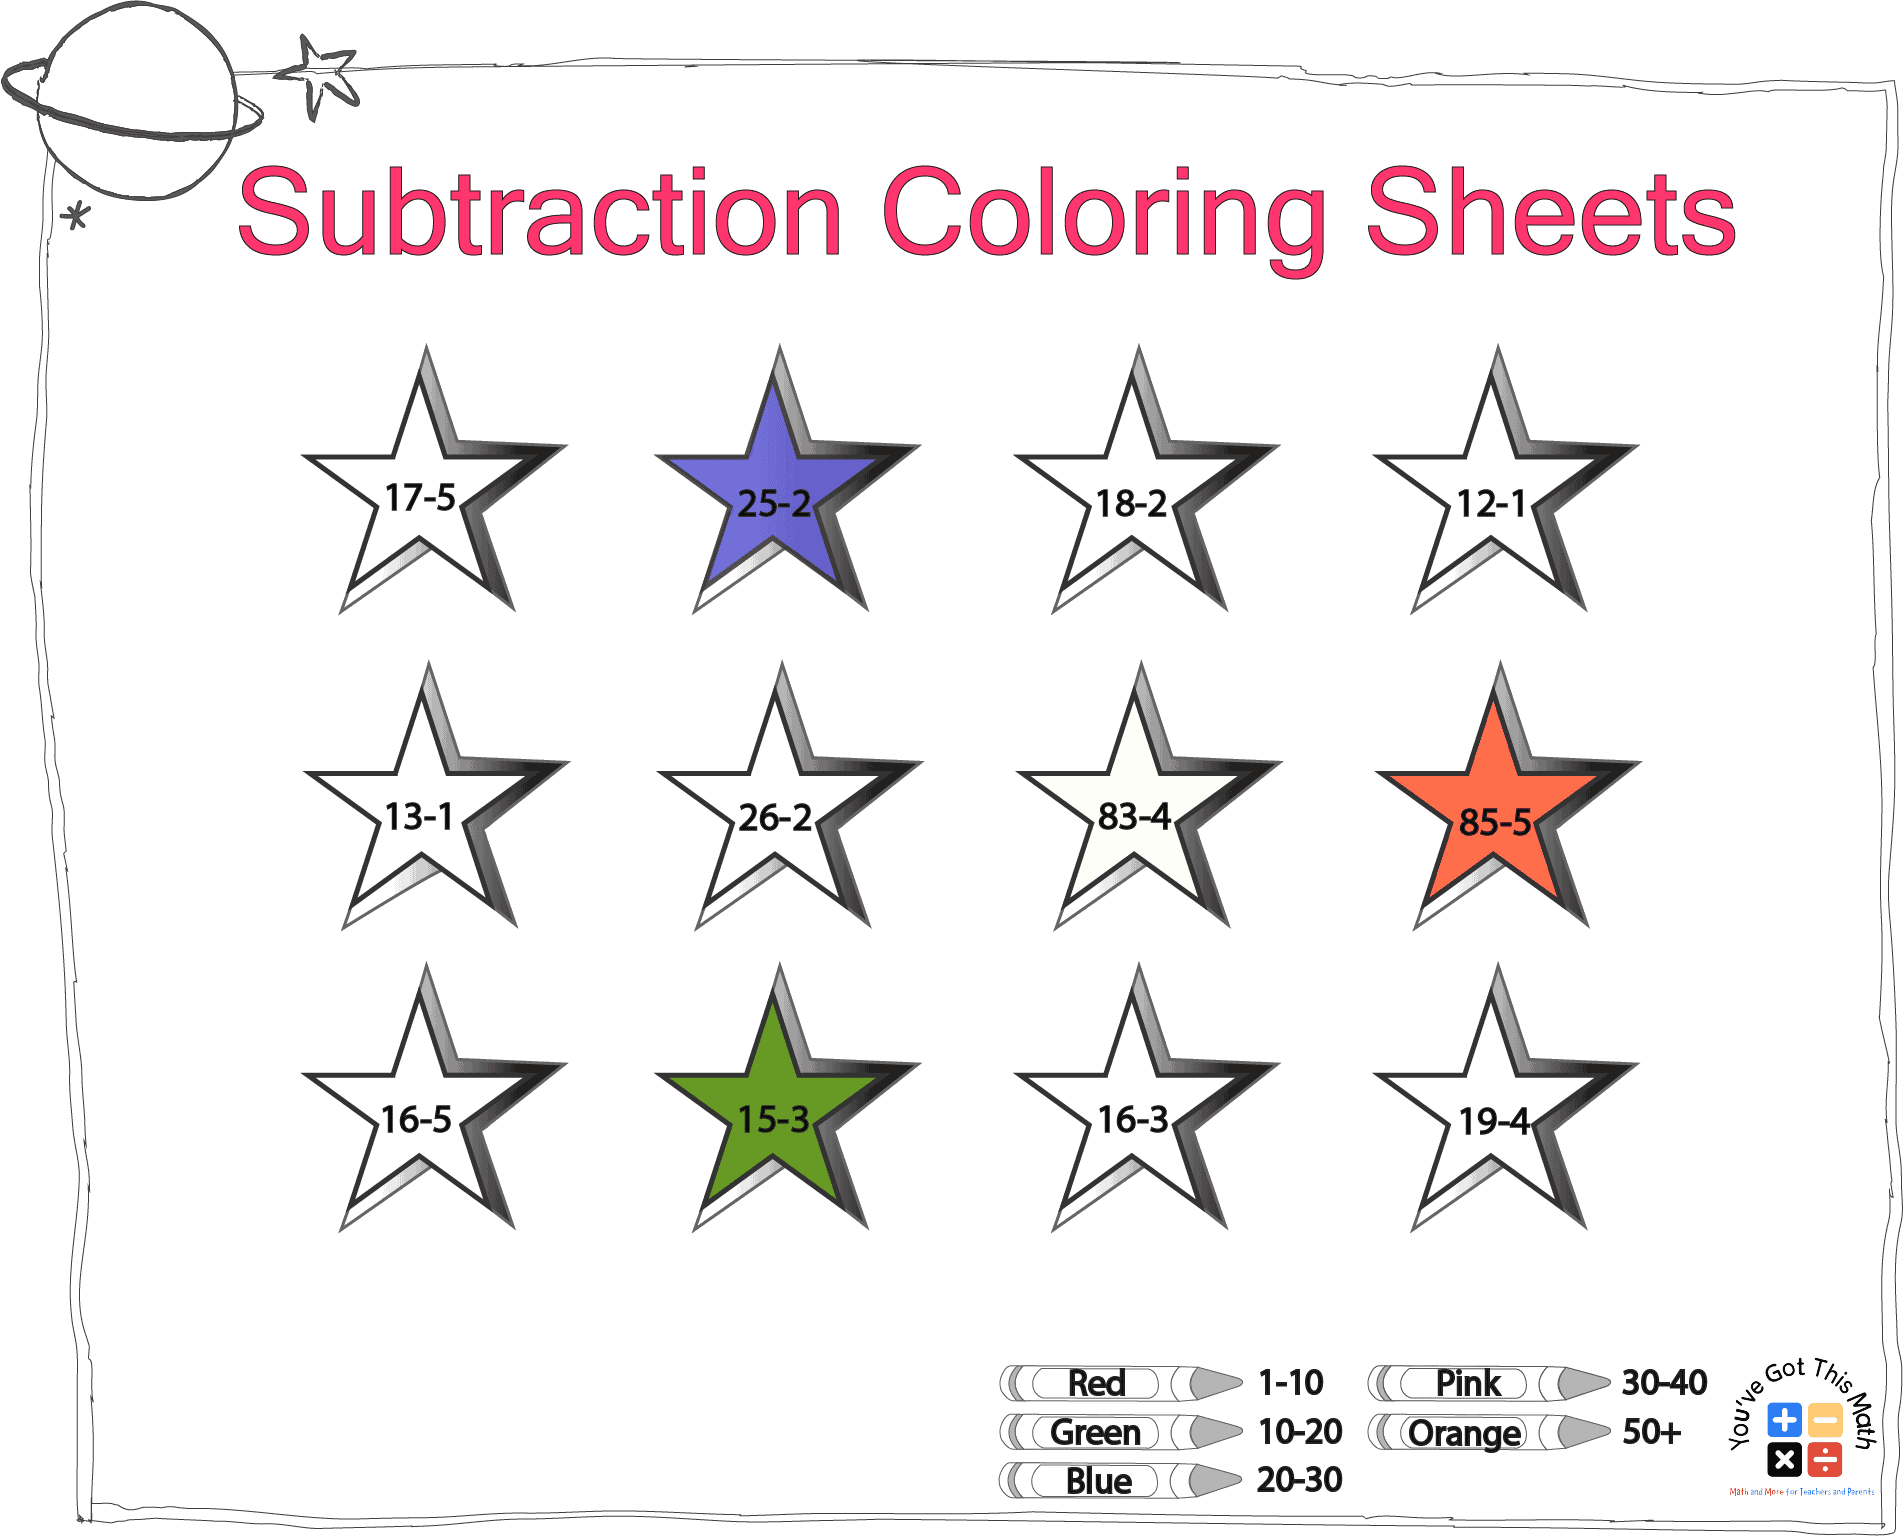 subtraction of one digit from two digits in subtraction coloring sheets